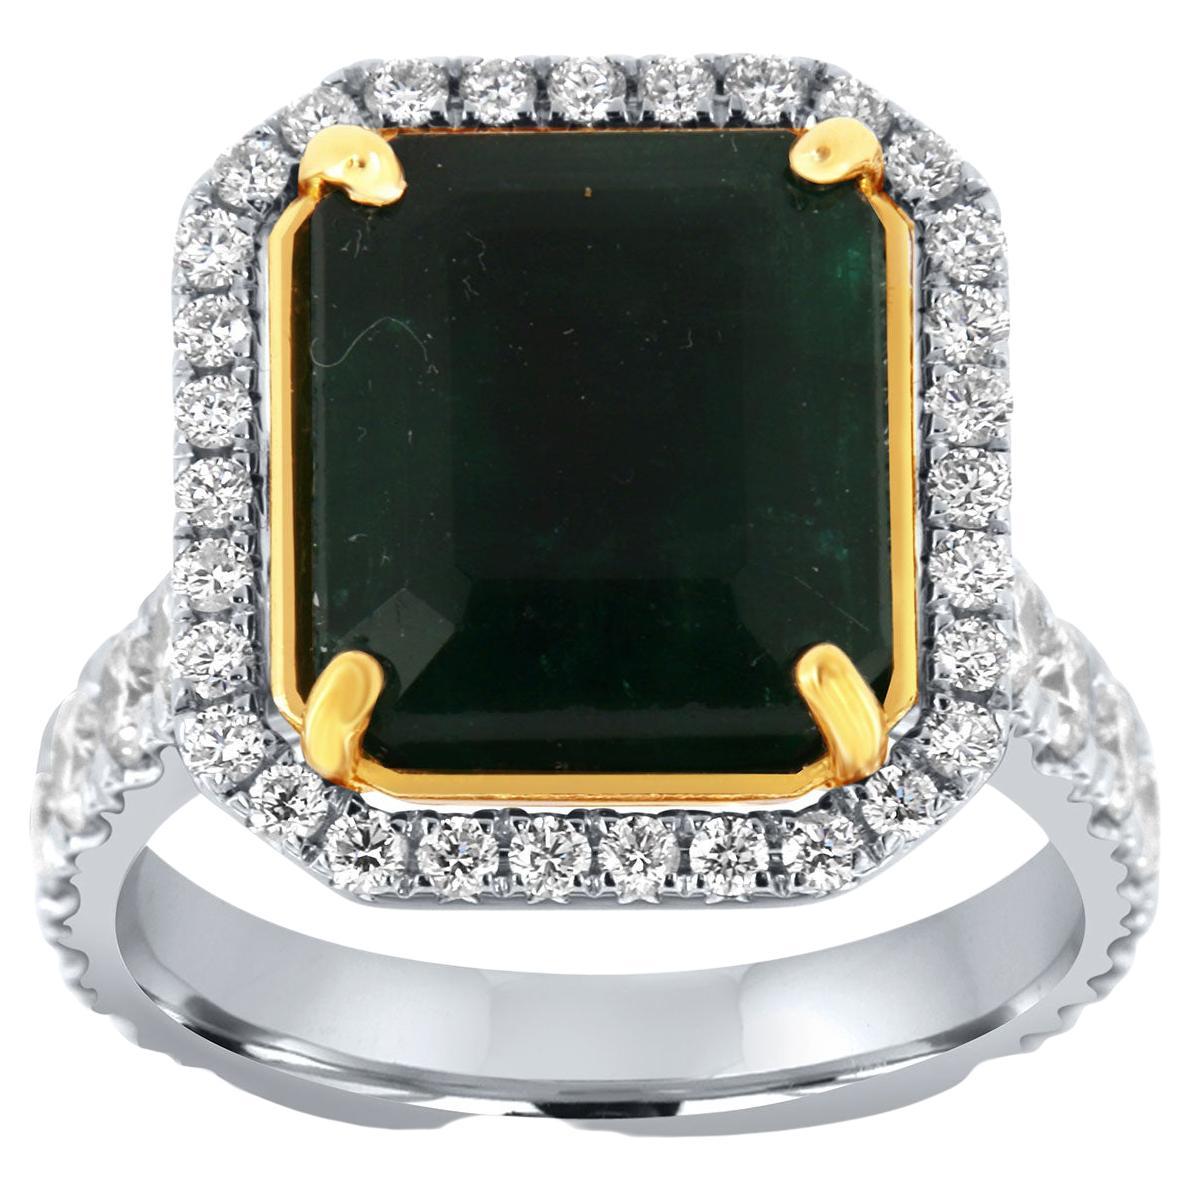 14K White & Yellow Gold GIA Certified 7.51 Carat Green Emerald Halo Diamond Ring For Sale